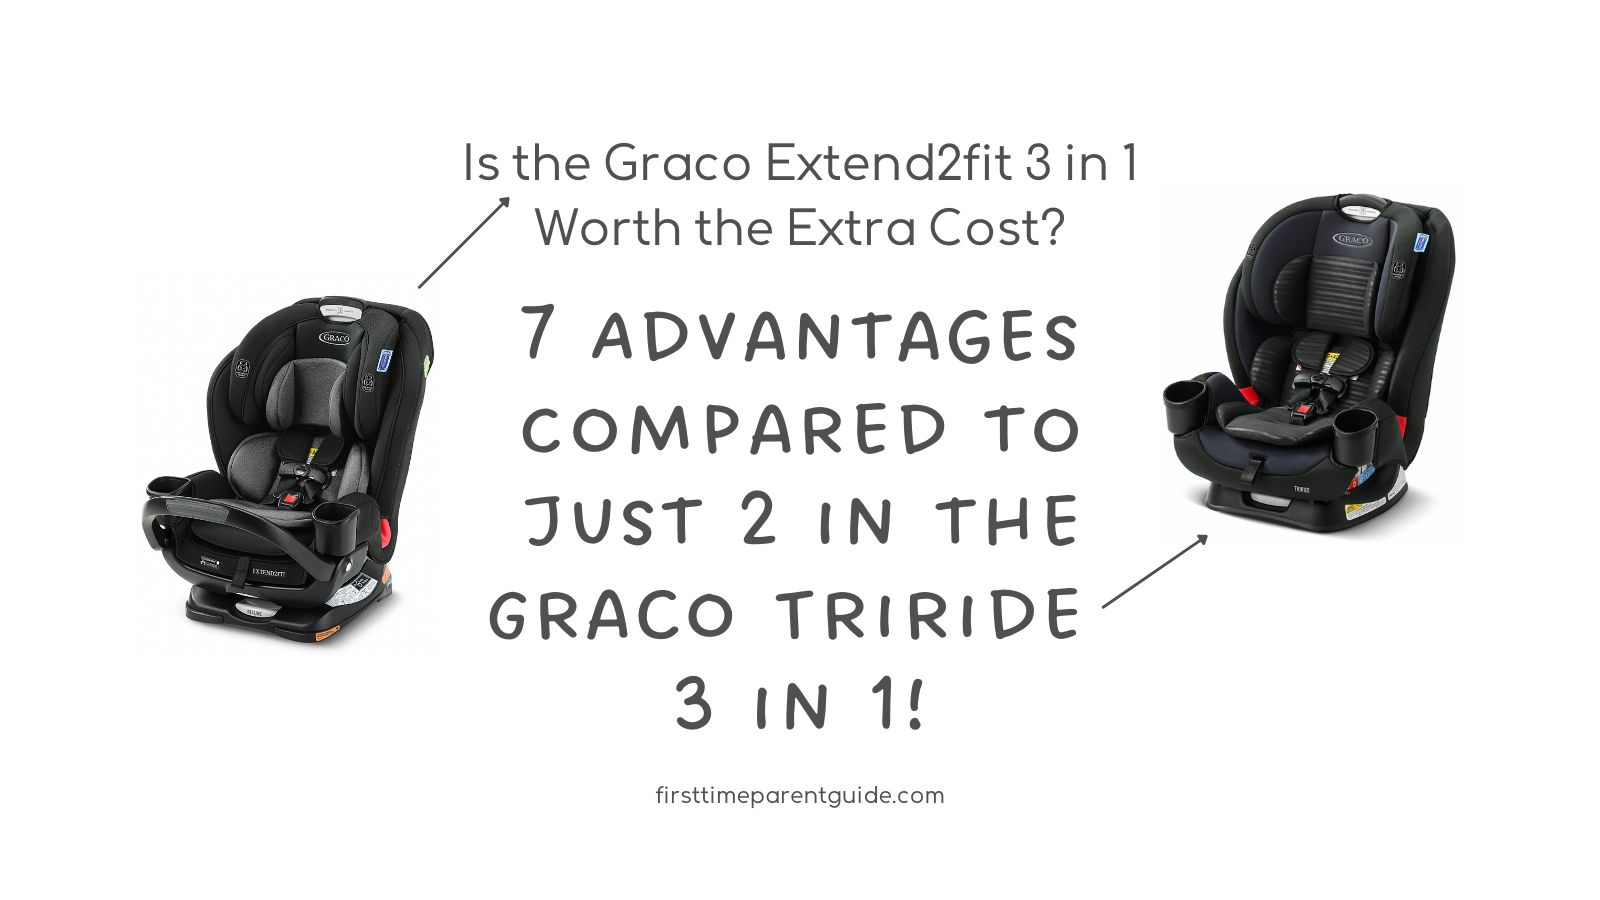 Is the Graco Extend2fit 3 in 1